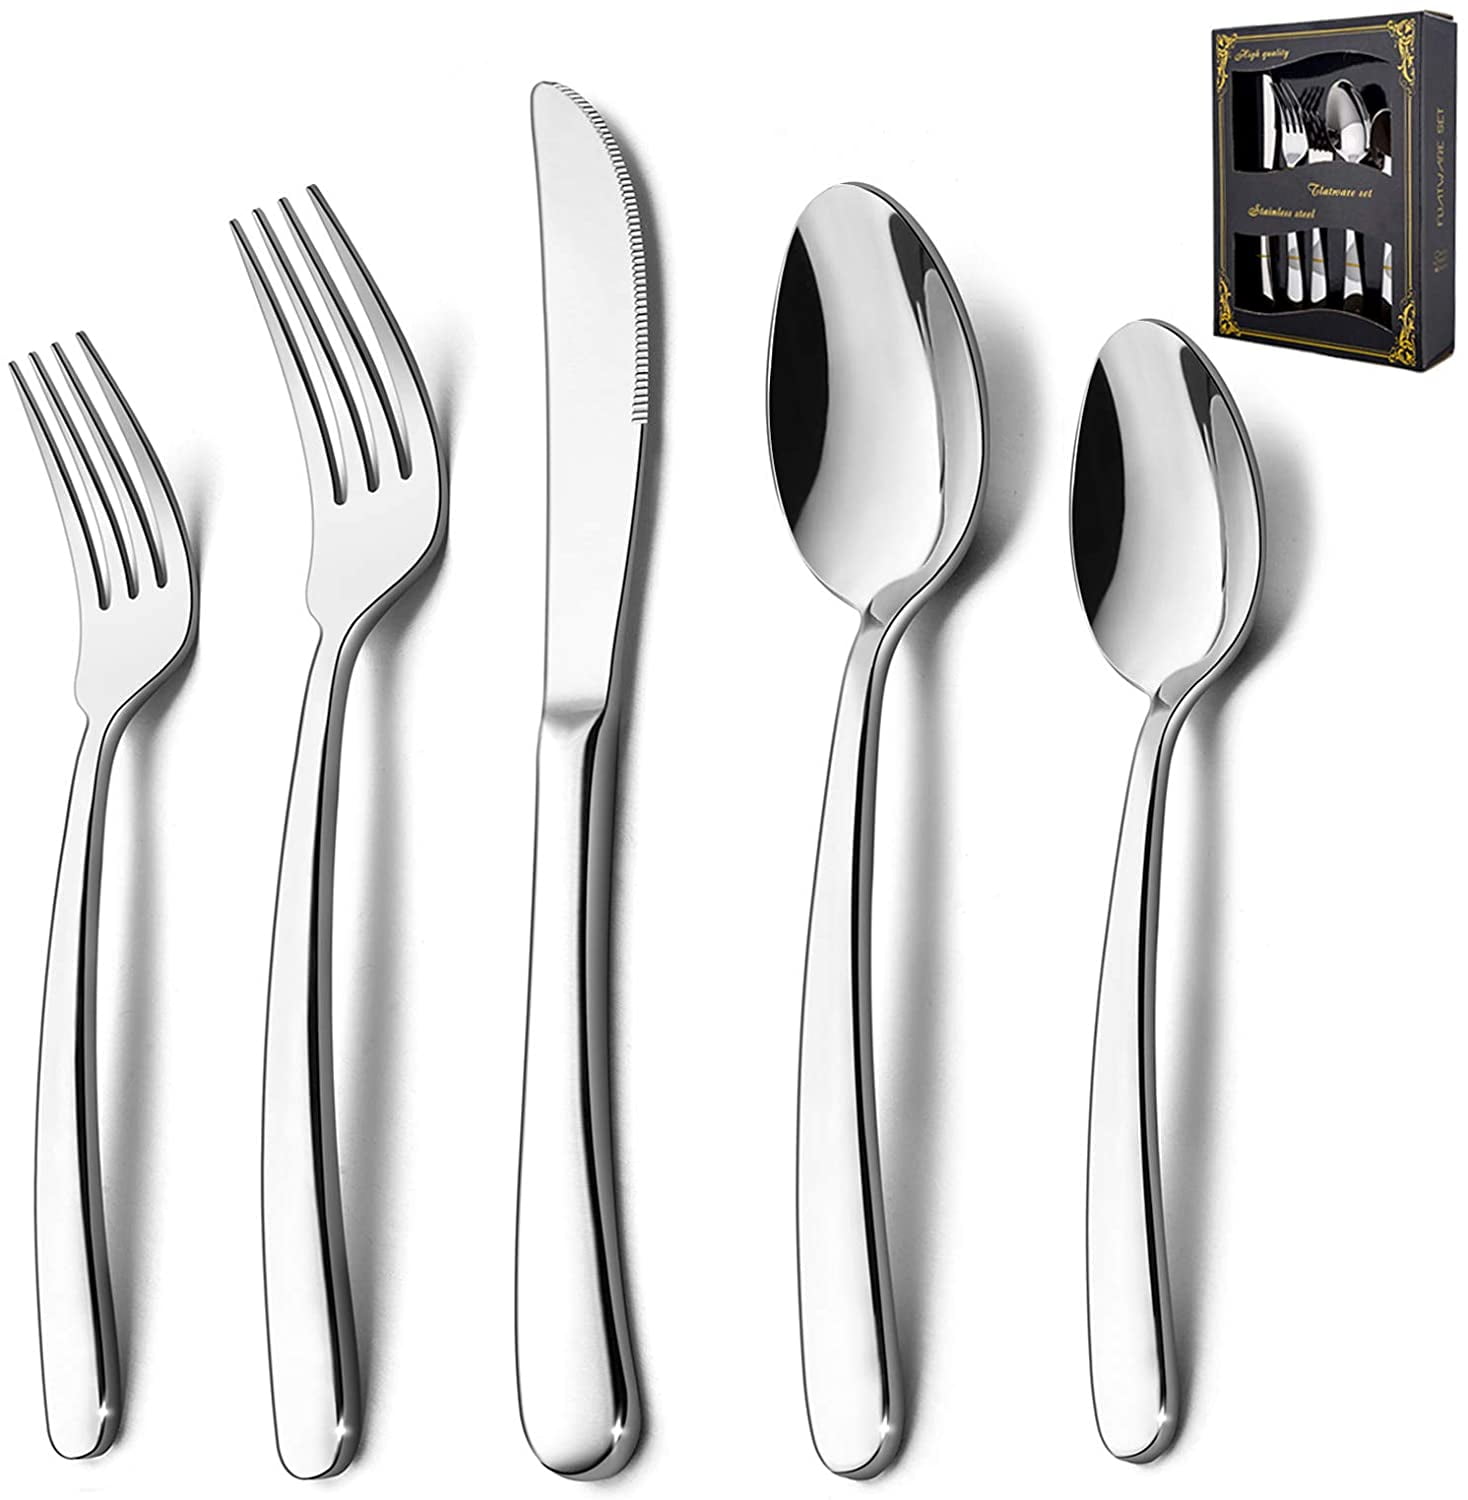 Mirror Polished Dishwasher Safe HaWare Stainless Steel Flatware Service for 4 Eating Utensil for Home Modern Tableware Cutlery with Pearled Edge 20-Piece Silverware Set with Drawer Organizer 